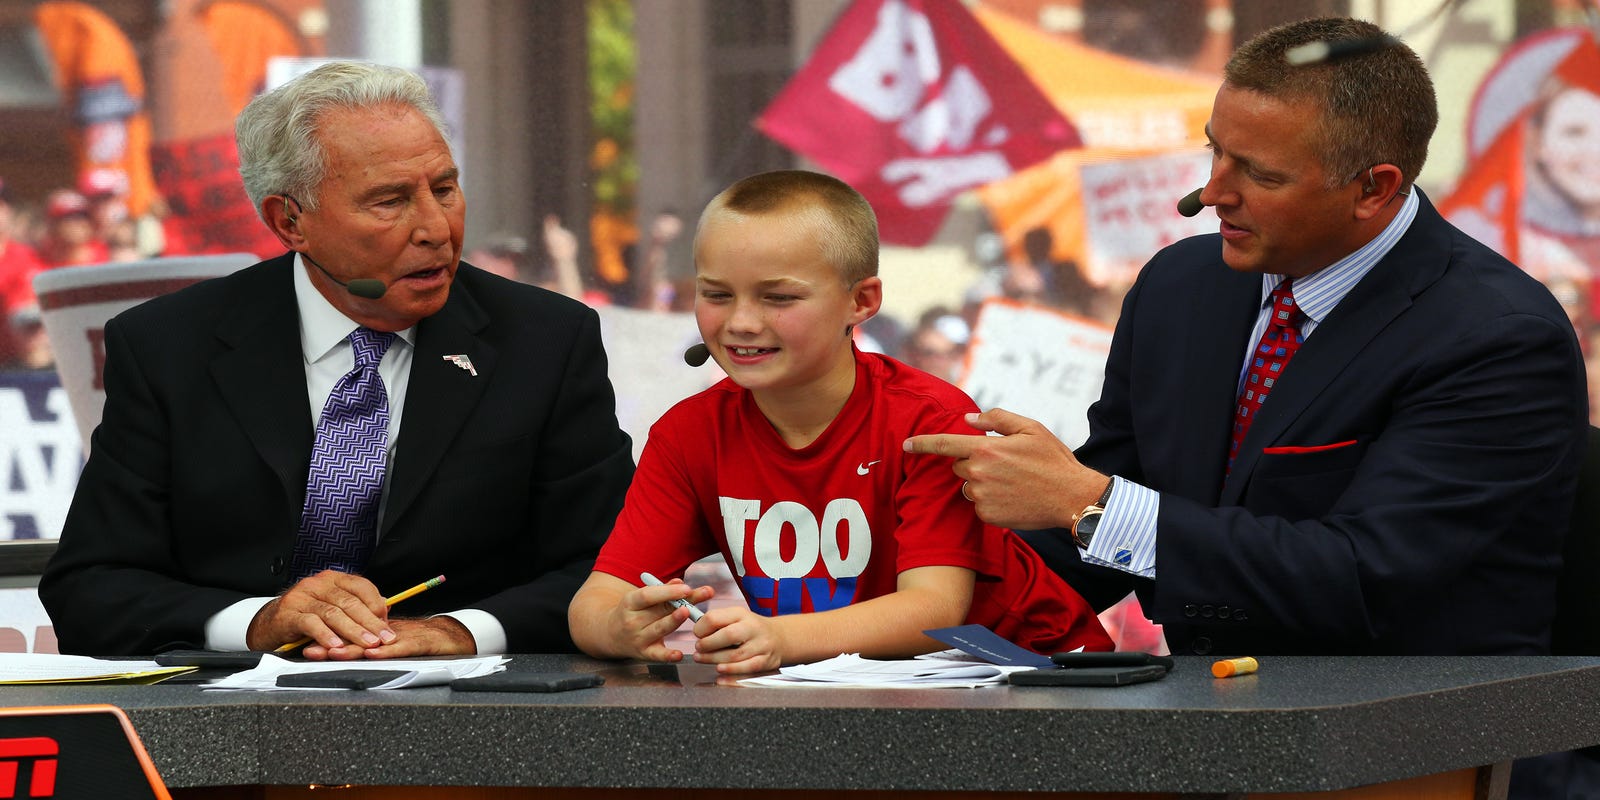 Lee Corso still going on 'GameDay' with help from his friends